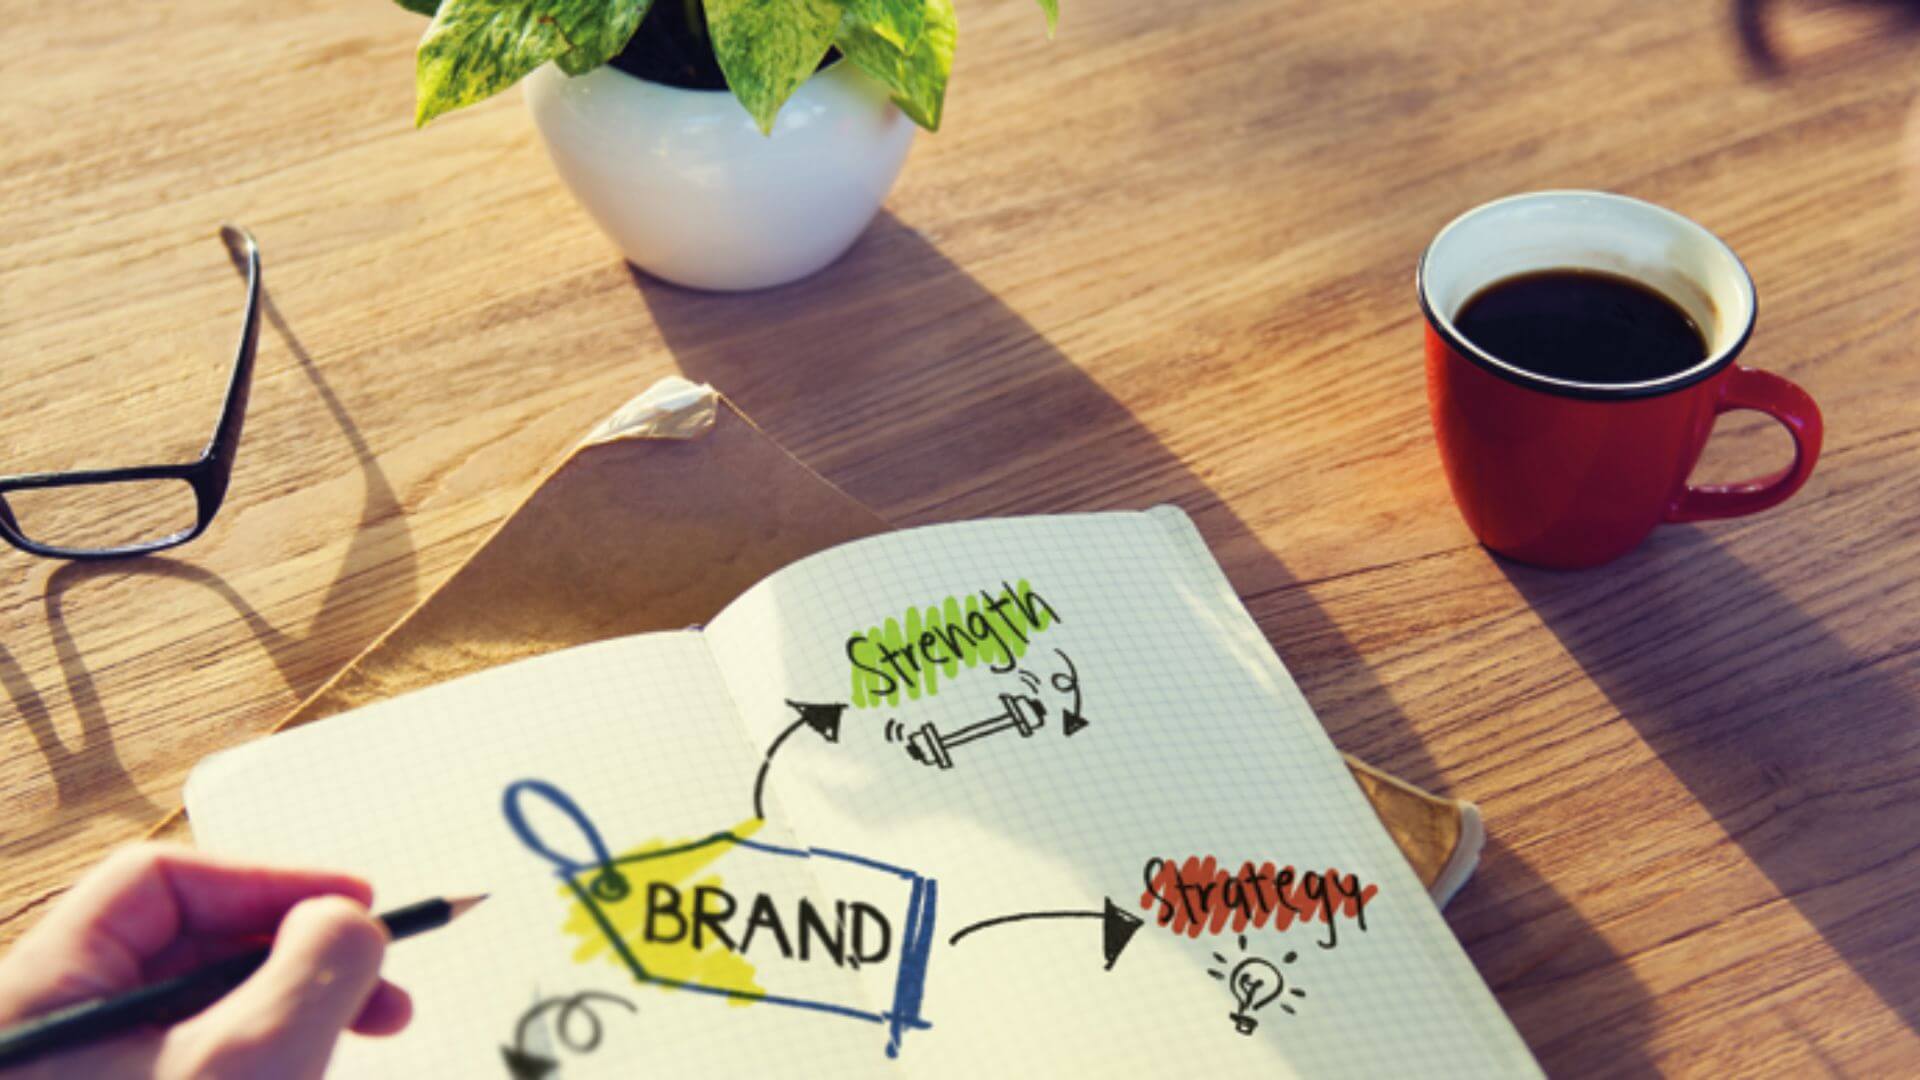 Personal Brand: Why Is It Important And How Do You Build It?